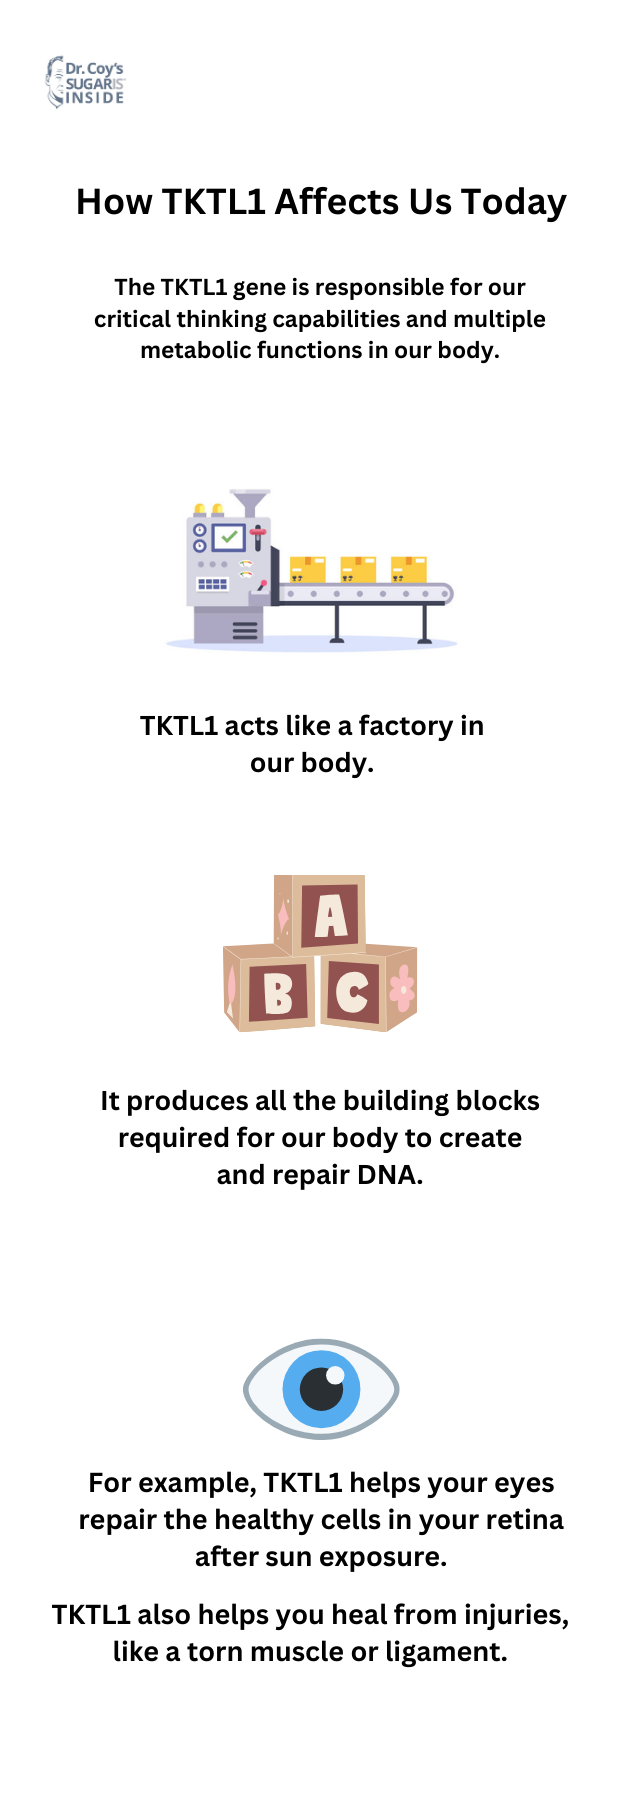 Infographic showing how the TKTL1 gene is responsible for our critical thinking capabilities and multiple metabolic functions within our body